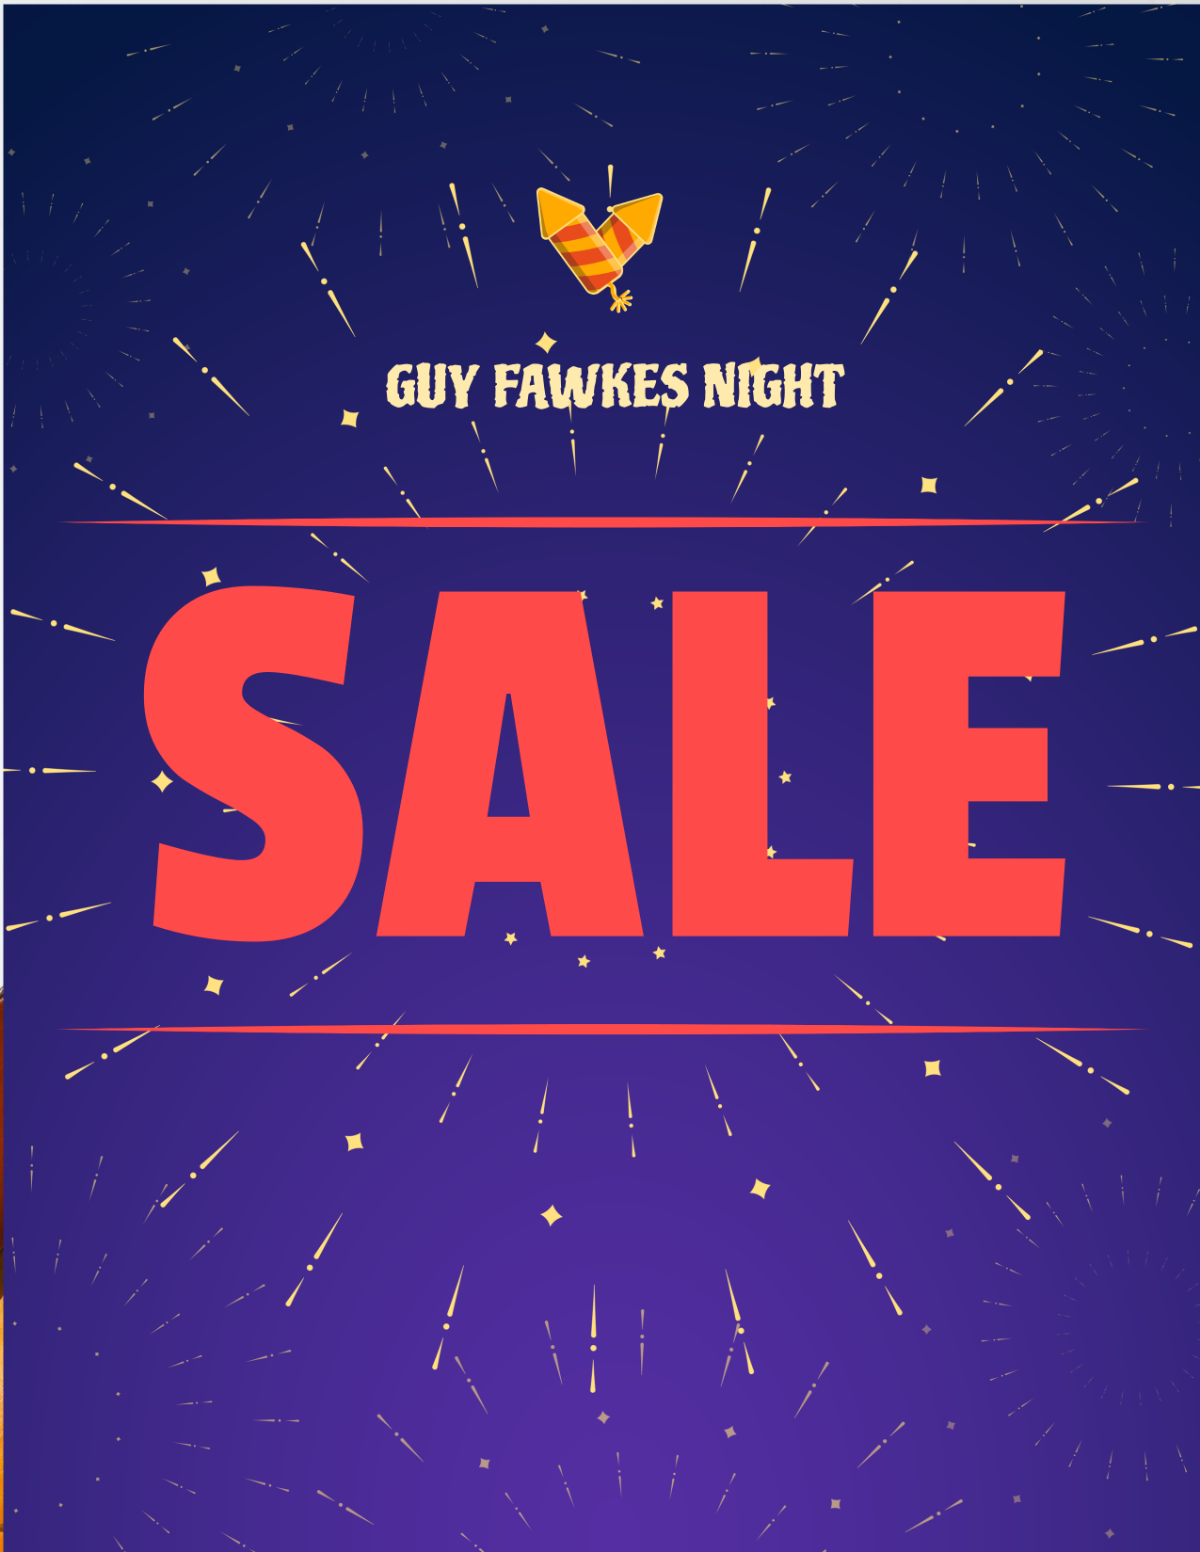 Free Guy Fawkes Night Sales Flyer Template